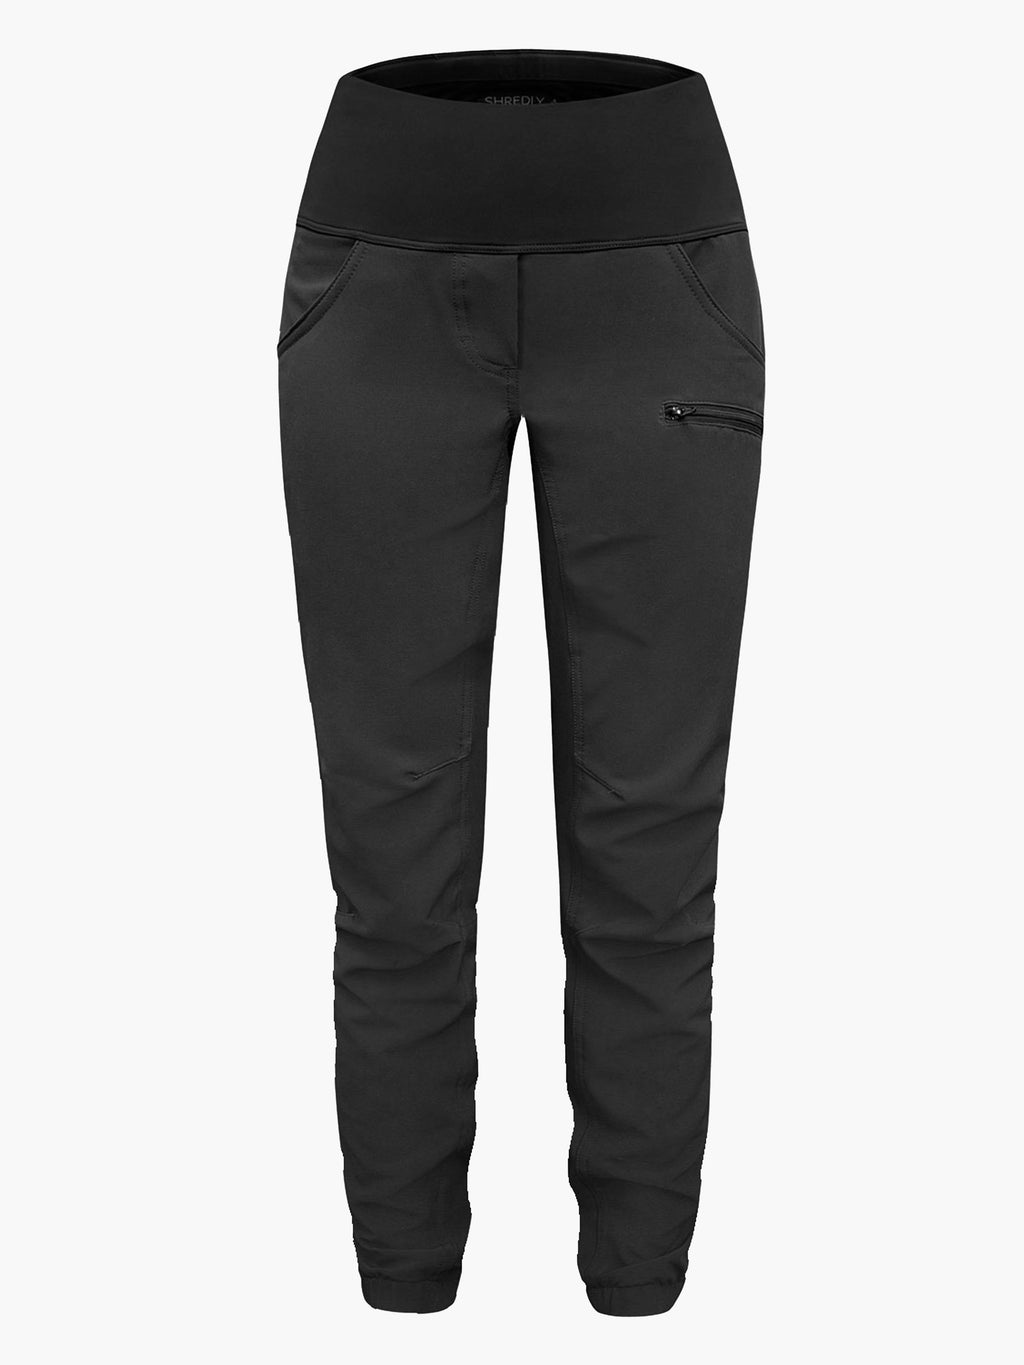 SHREDLY - Limitless - Stretch Waistband High-Rise Pant : Noir - image